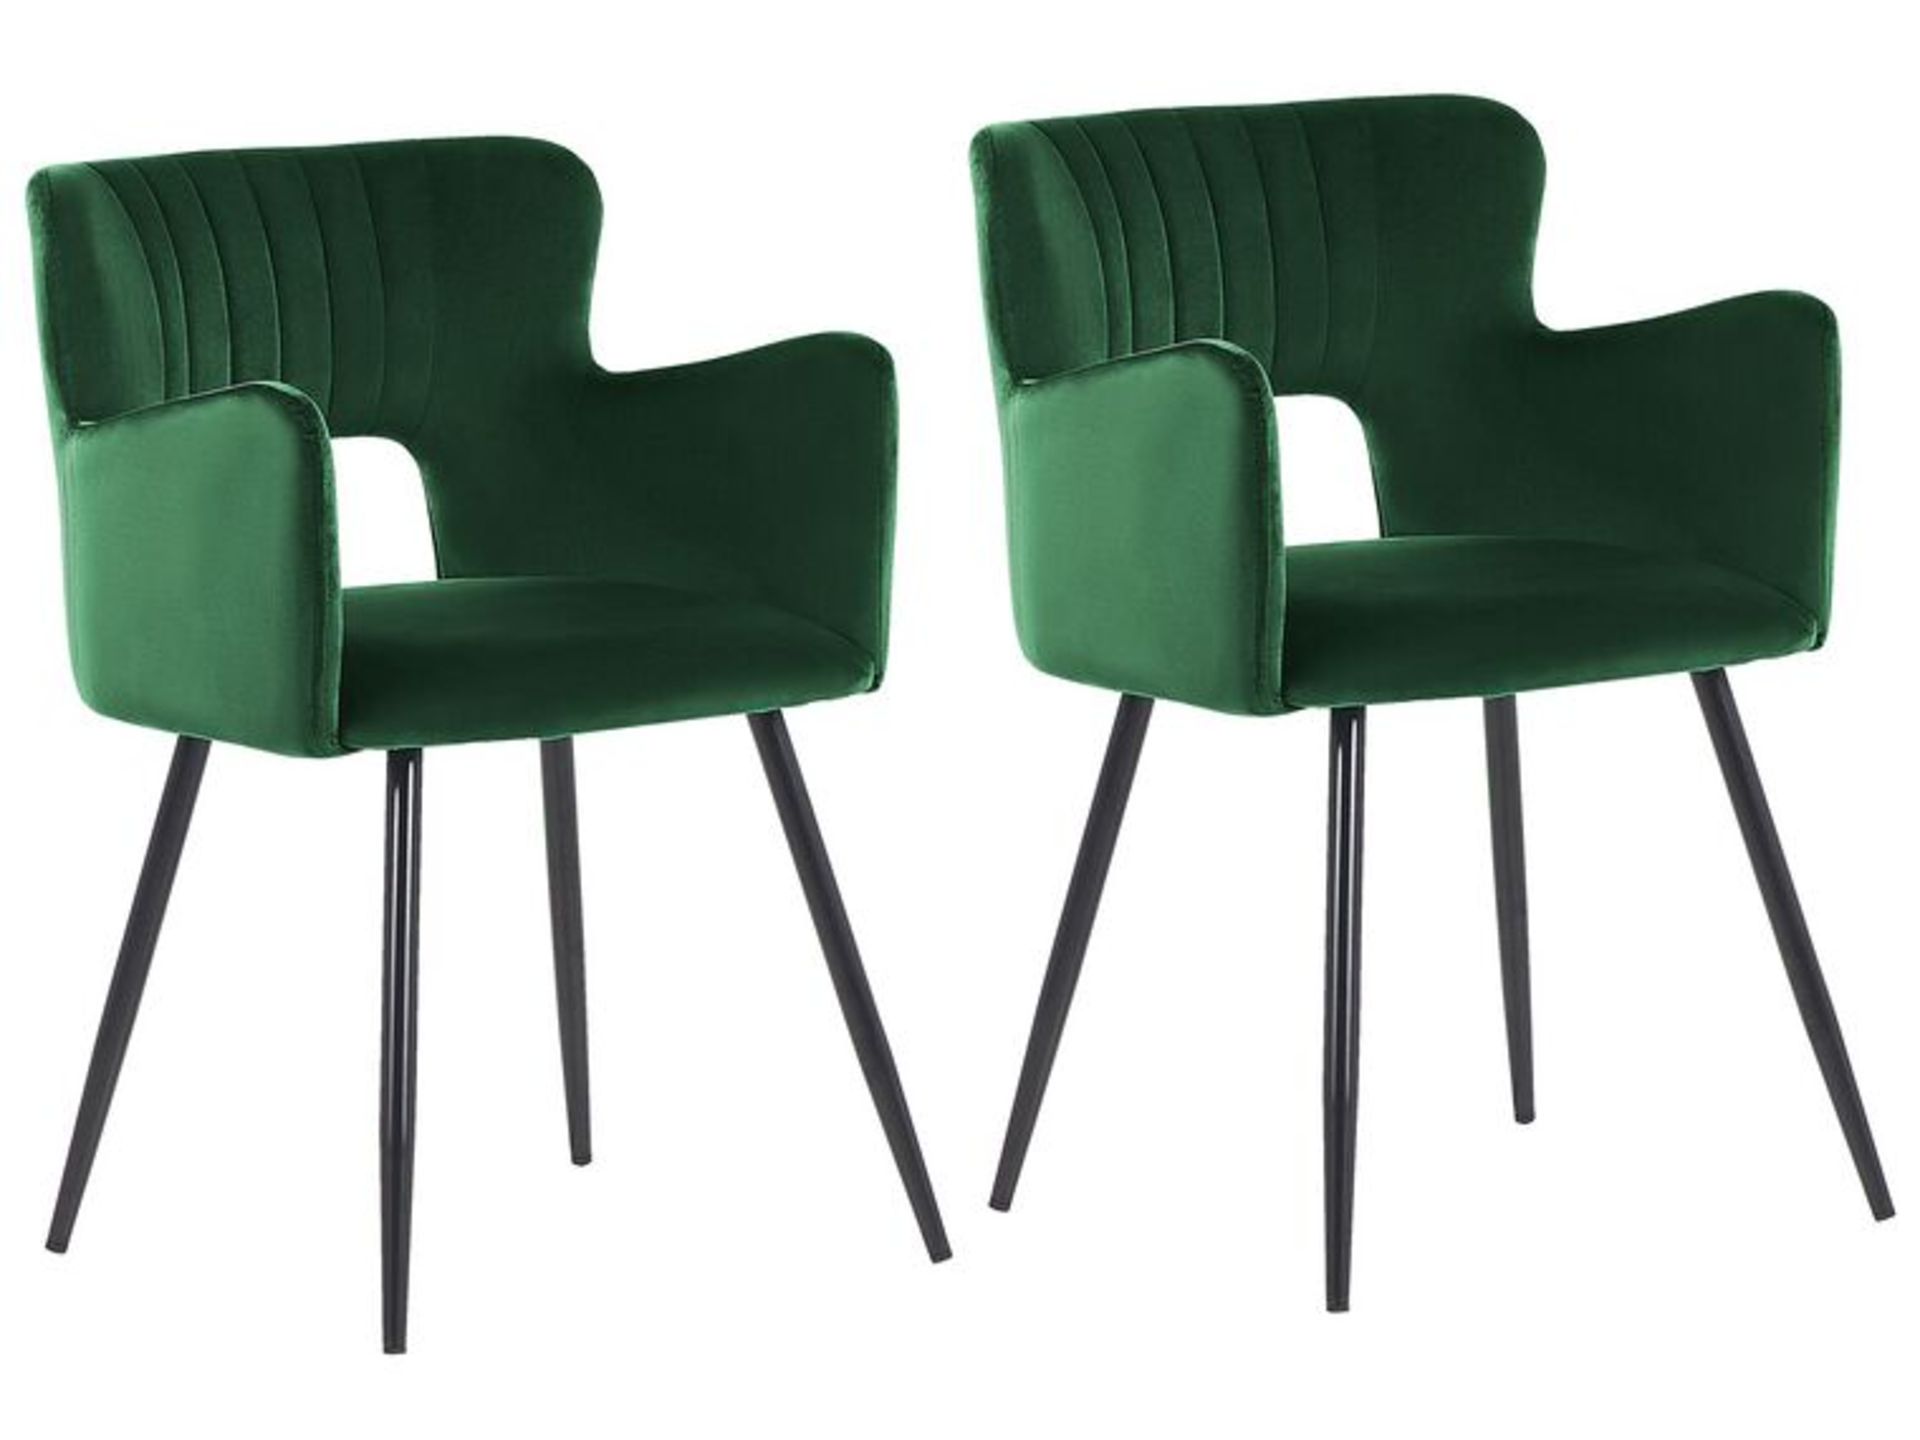 Sanilac Set of 2 Velvet Dining Chairs Emerald Green.- SR6U. RRP £239.99. These chairs are all